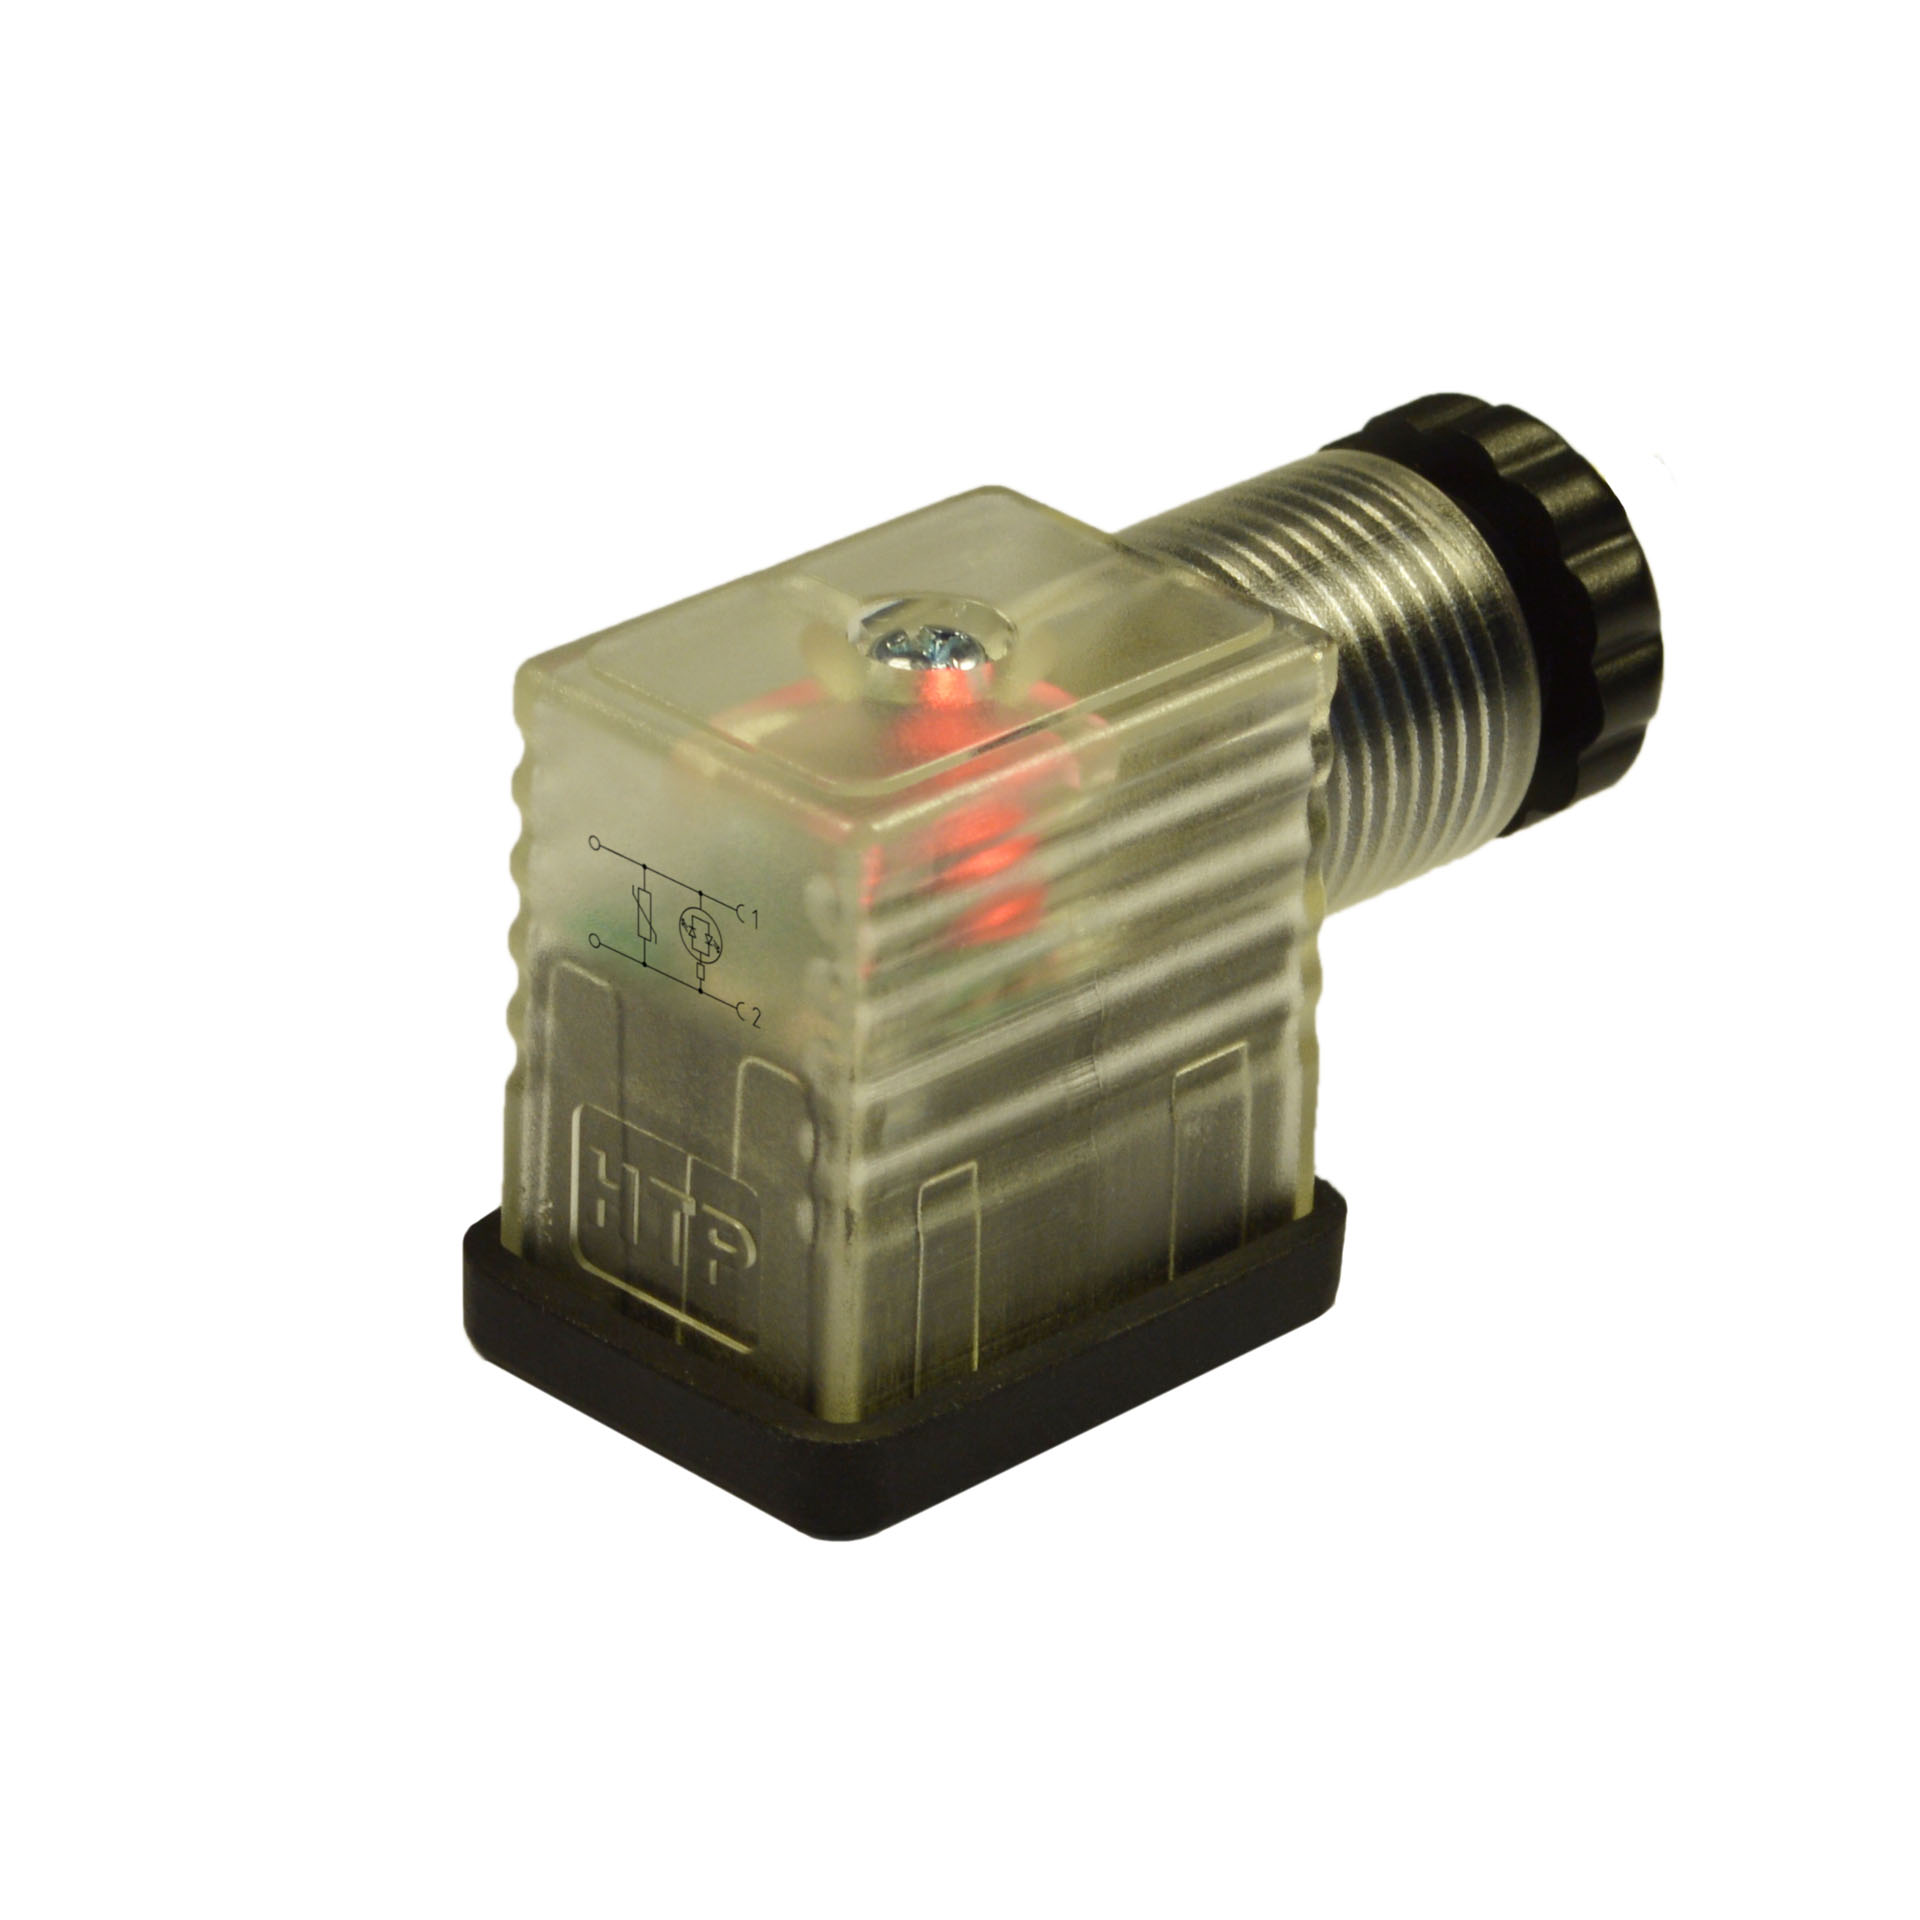 Industrial standard(typeB)field attachable,2p+PE(h.12),red LED+vdr,12VAC/DC,PG9